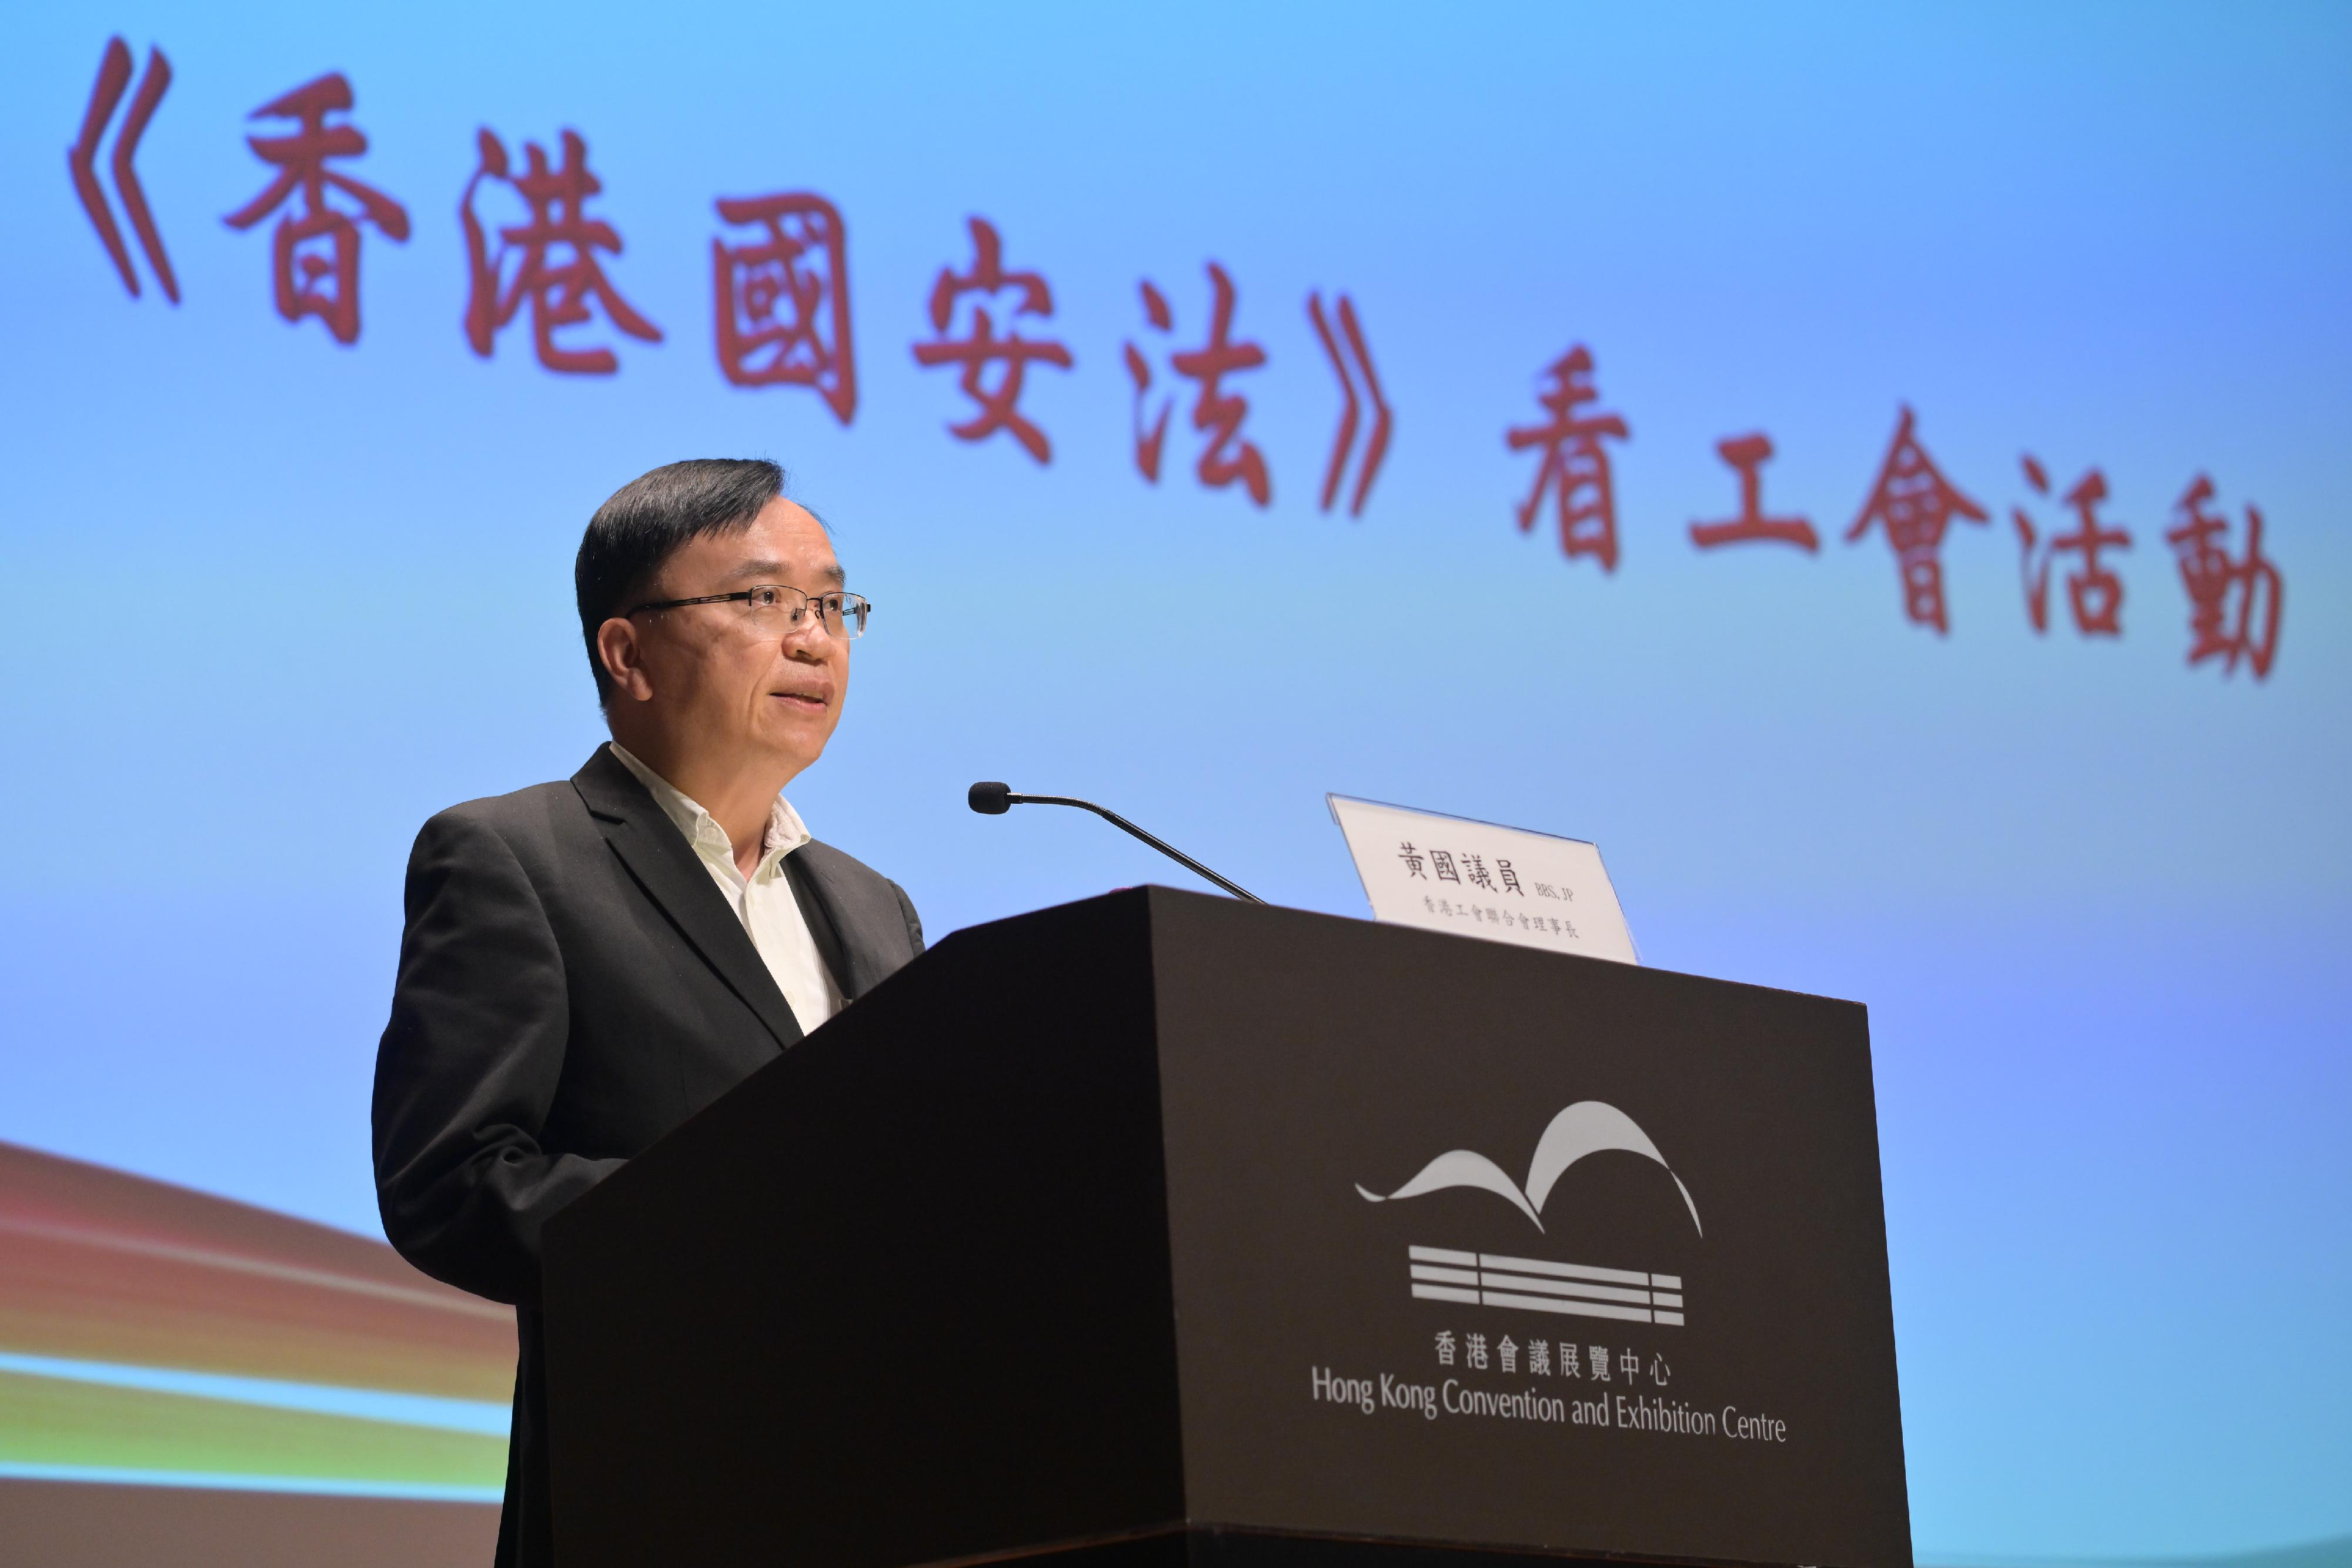 The Registry of Trade Unions of the Labour Department held today (December 10) the Seminar on Hong Kong National Security Law for Trade Unions. Photo shows the Chairman of the Hong Kong Federation of Trade Unions and Legislative Council Member Mr Kingsley Wong, delivering a talk.